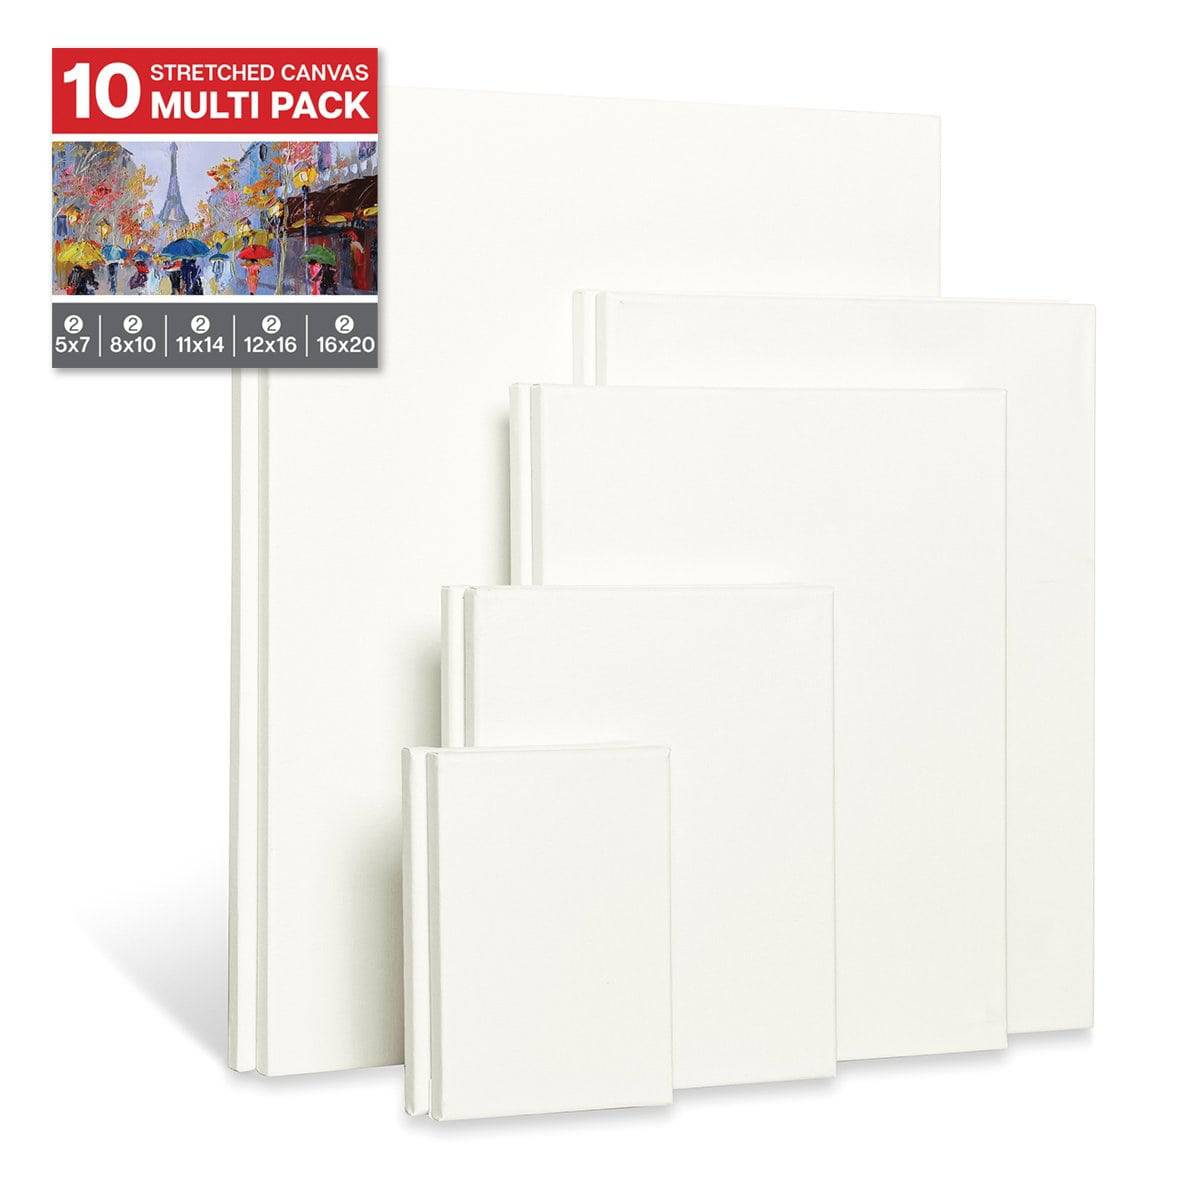 Stretched Painting Canvas (2 Ea.) 5x7 , 8x10 , 11x14 , 12x16 , 16x20, 5x7  - 16x20 - 10 pk - Baker's